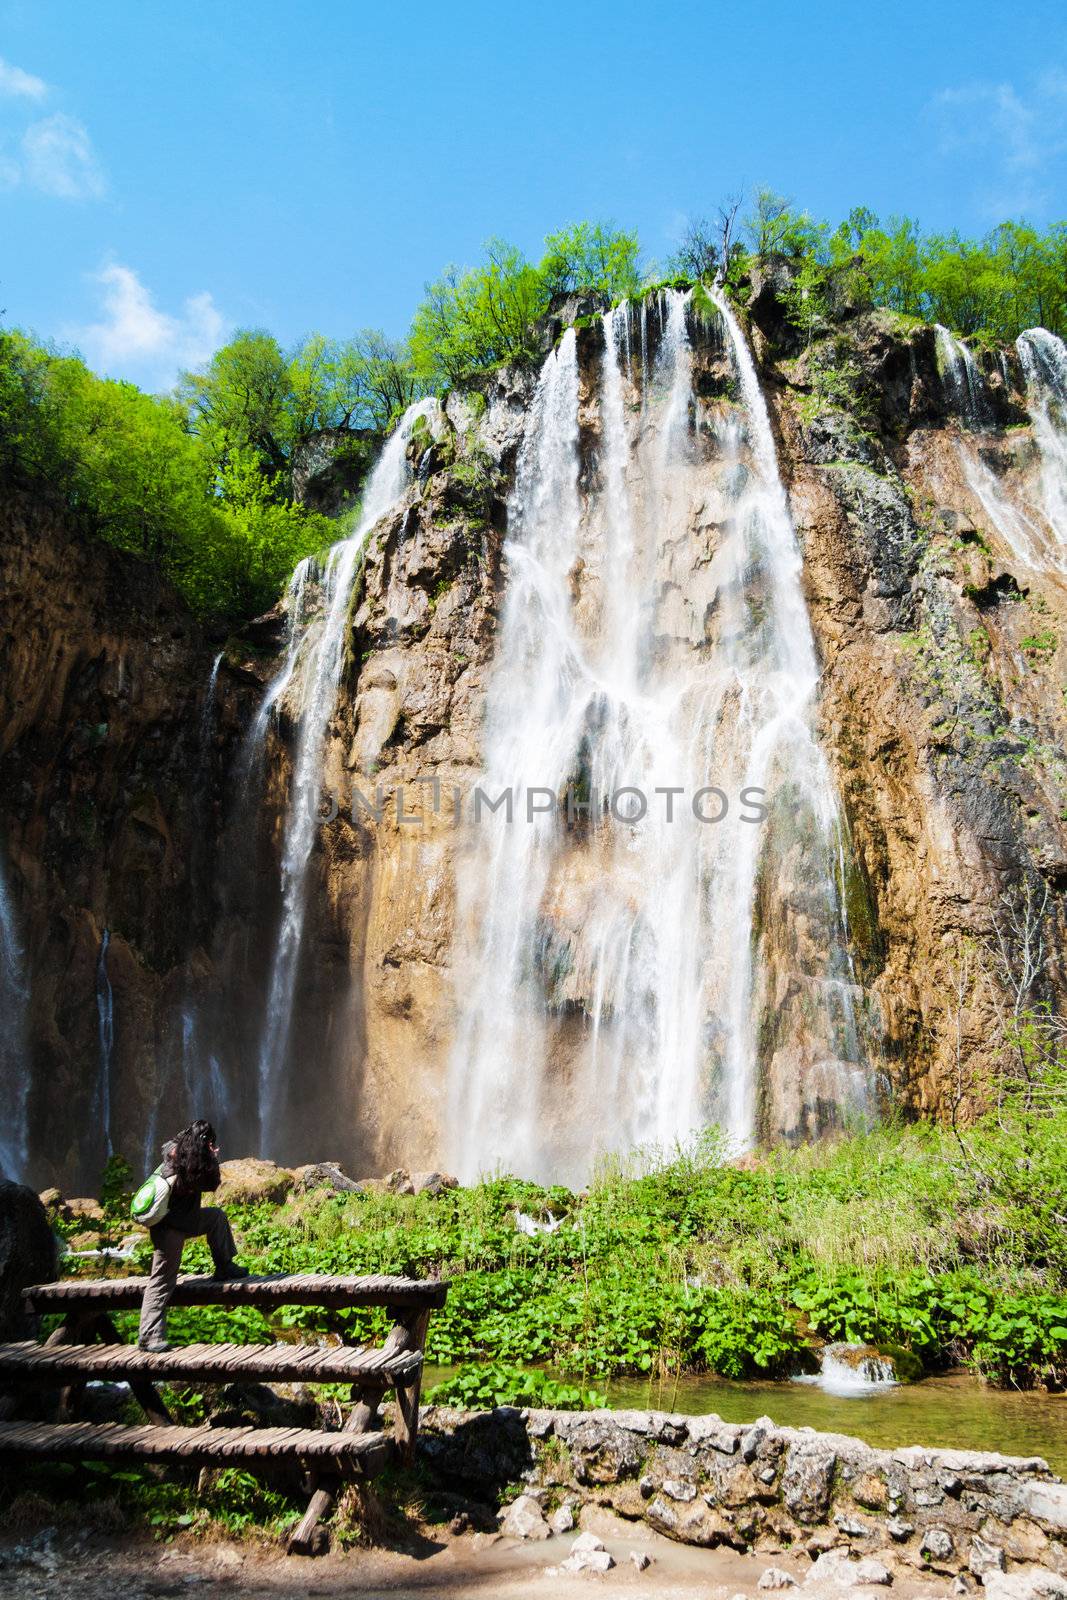 Young female tourist shooting a waterfal by Lamarinx